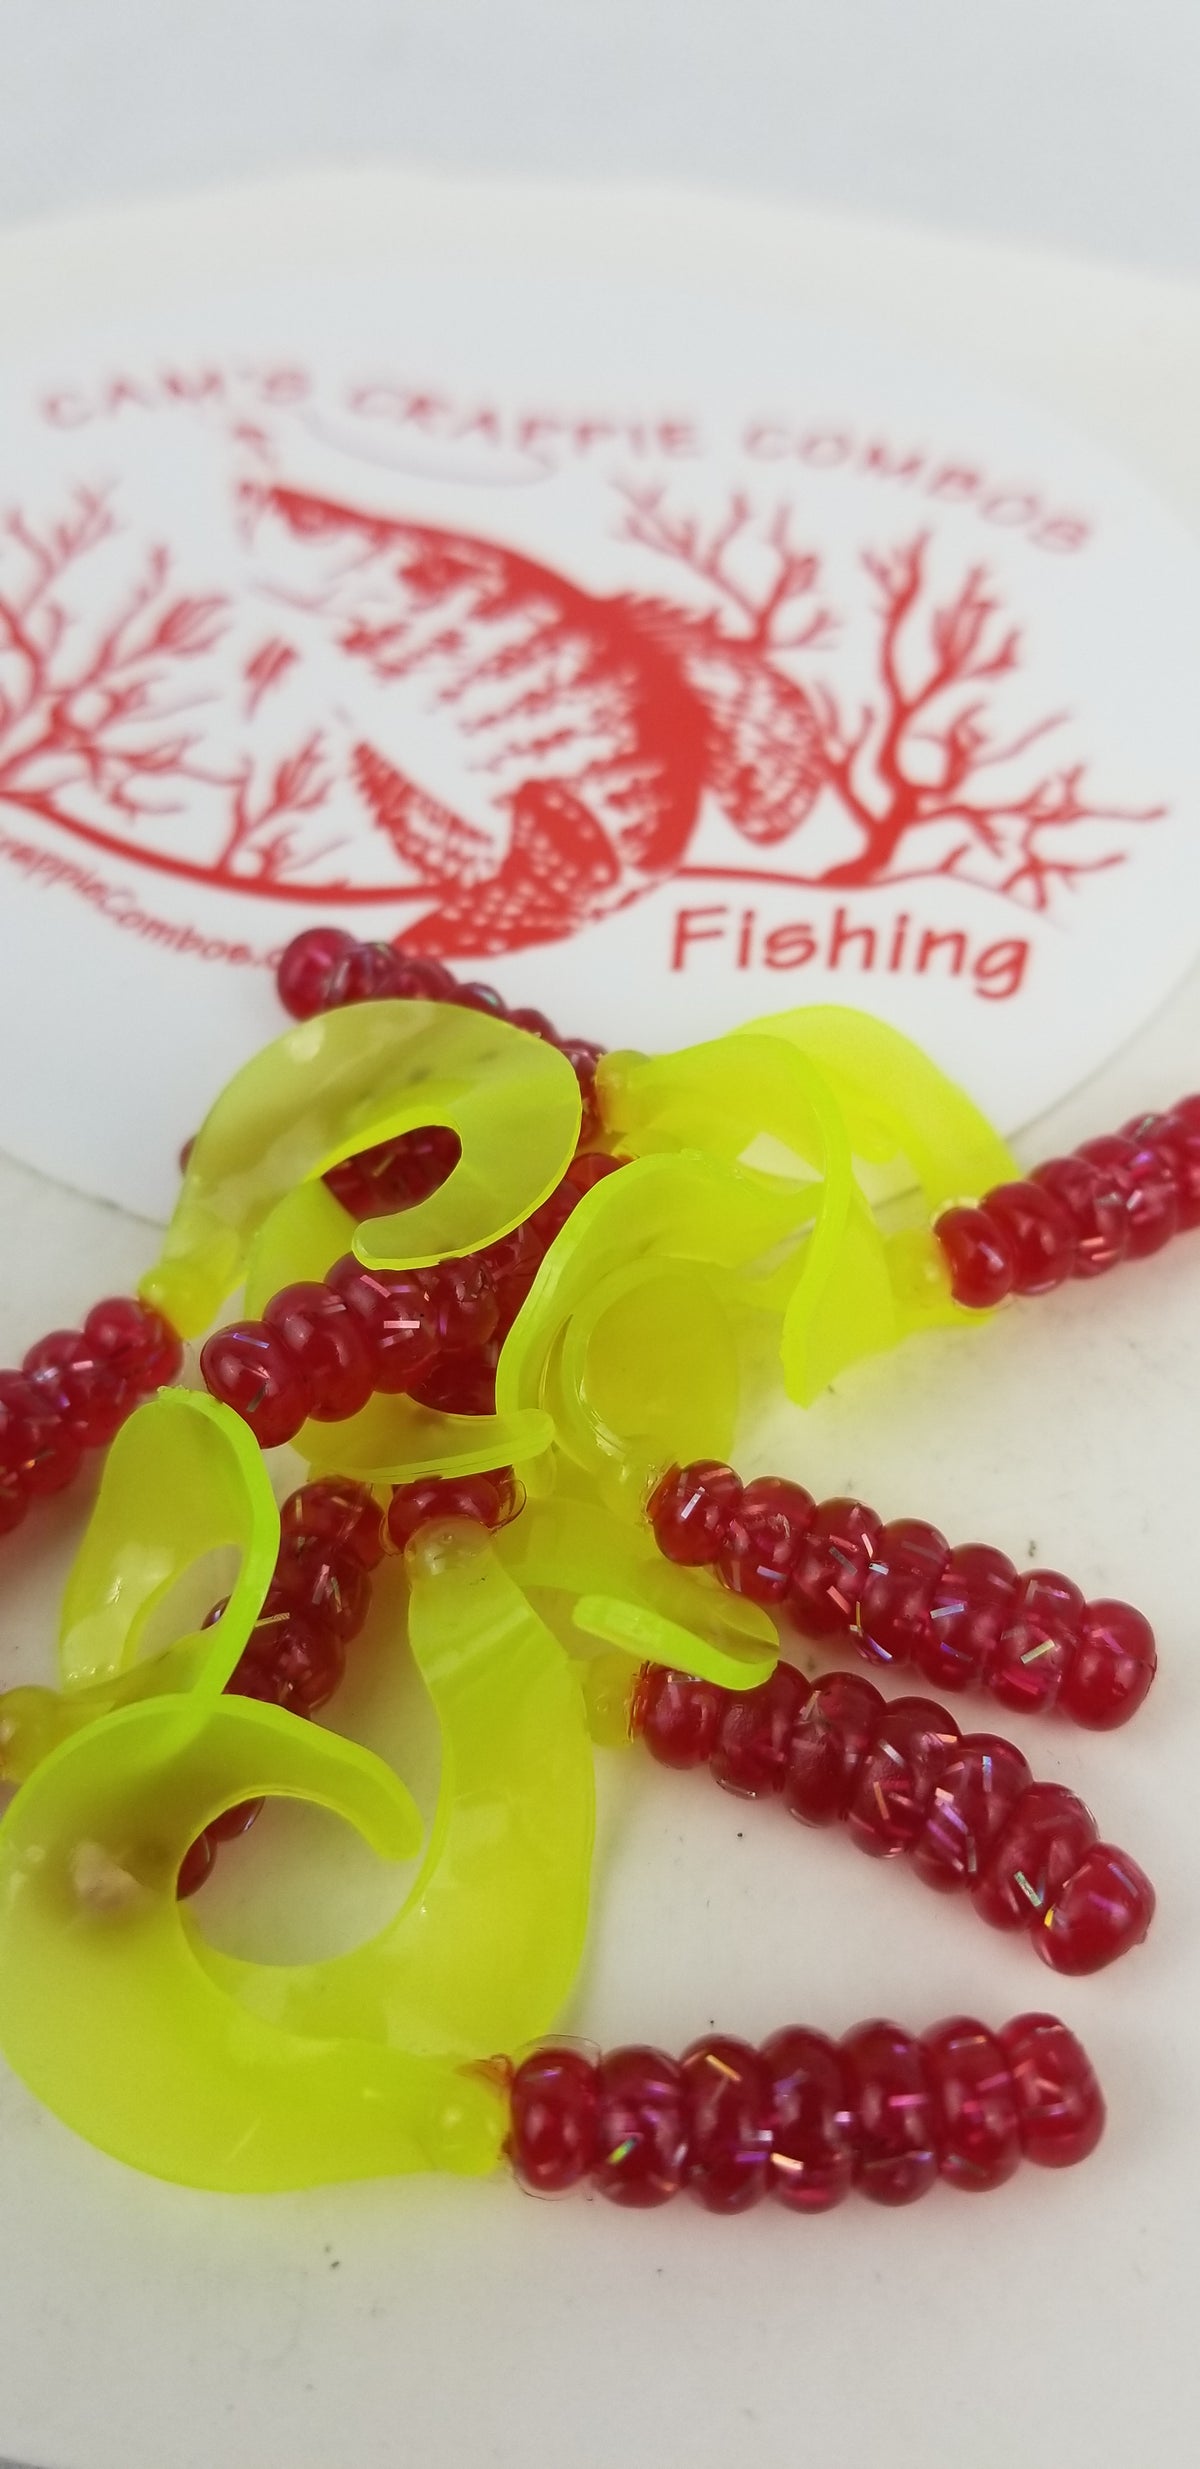 Cam's 2"(HOLOGRAM FLAKE) FIREBALL RED 40pc  Curly Tail Crappie Soft Jigs  [A Cam's Exclusive]